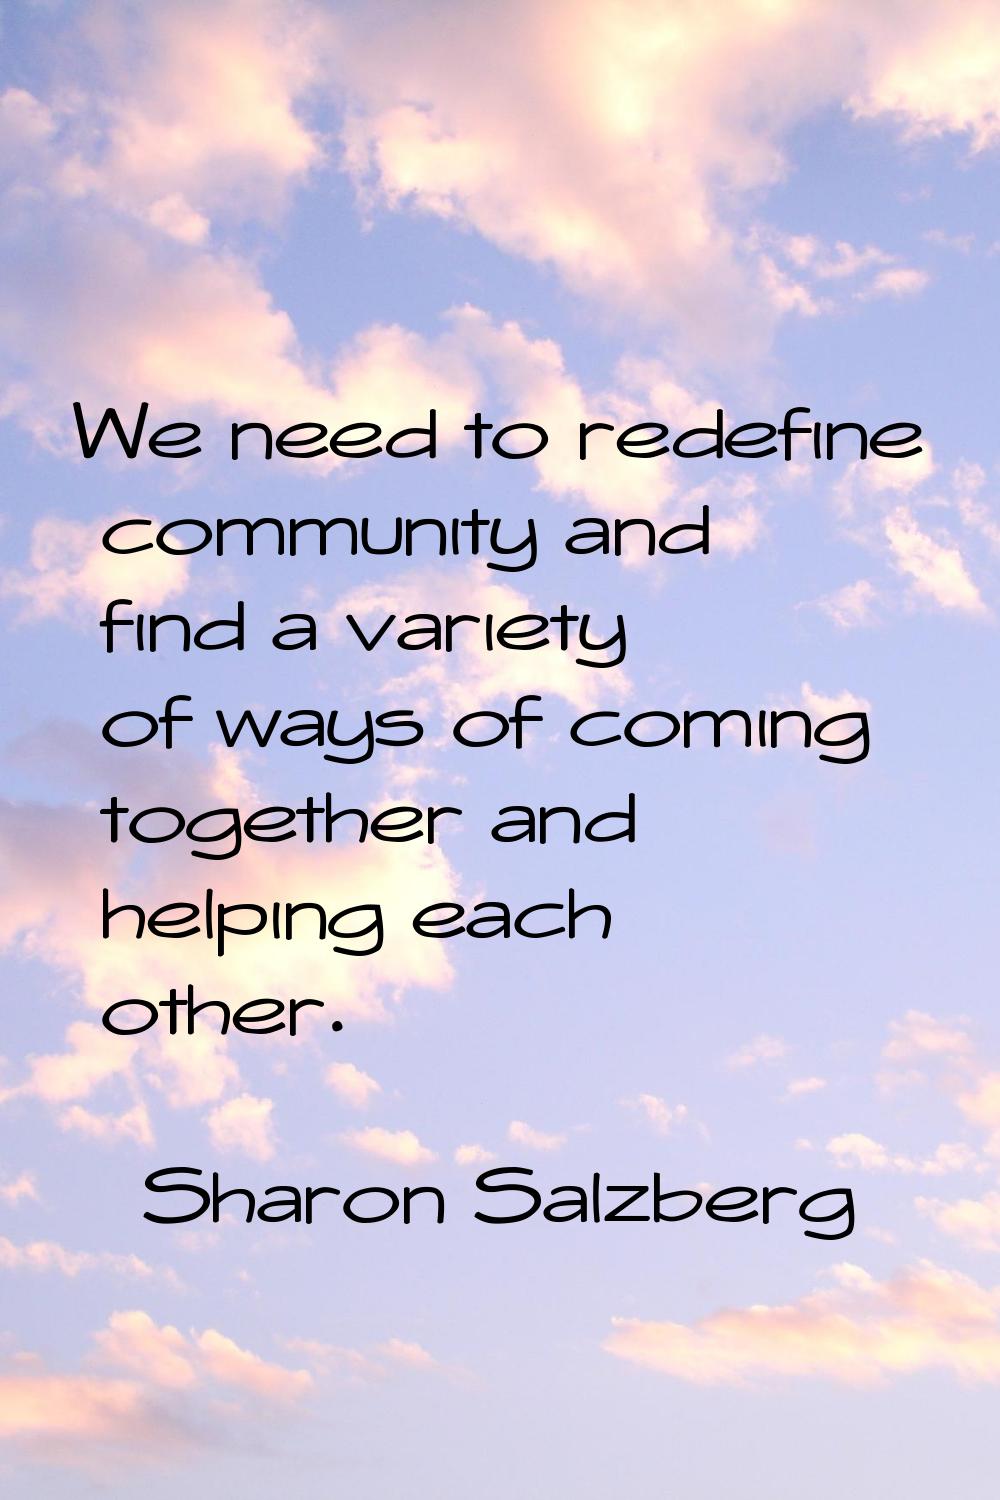 We need to redefine community and find a variety of ways of coming together and helping each other.